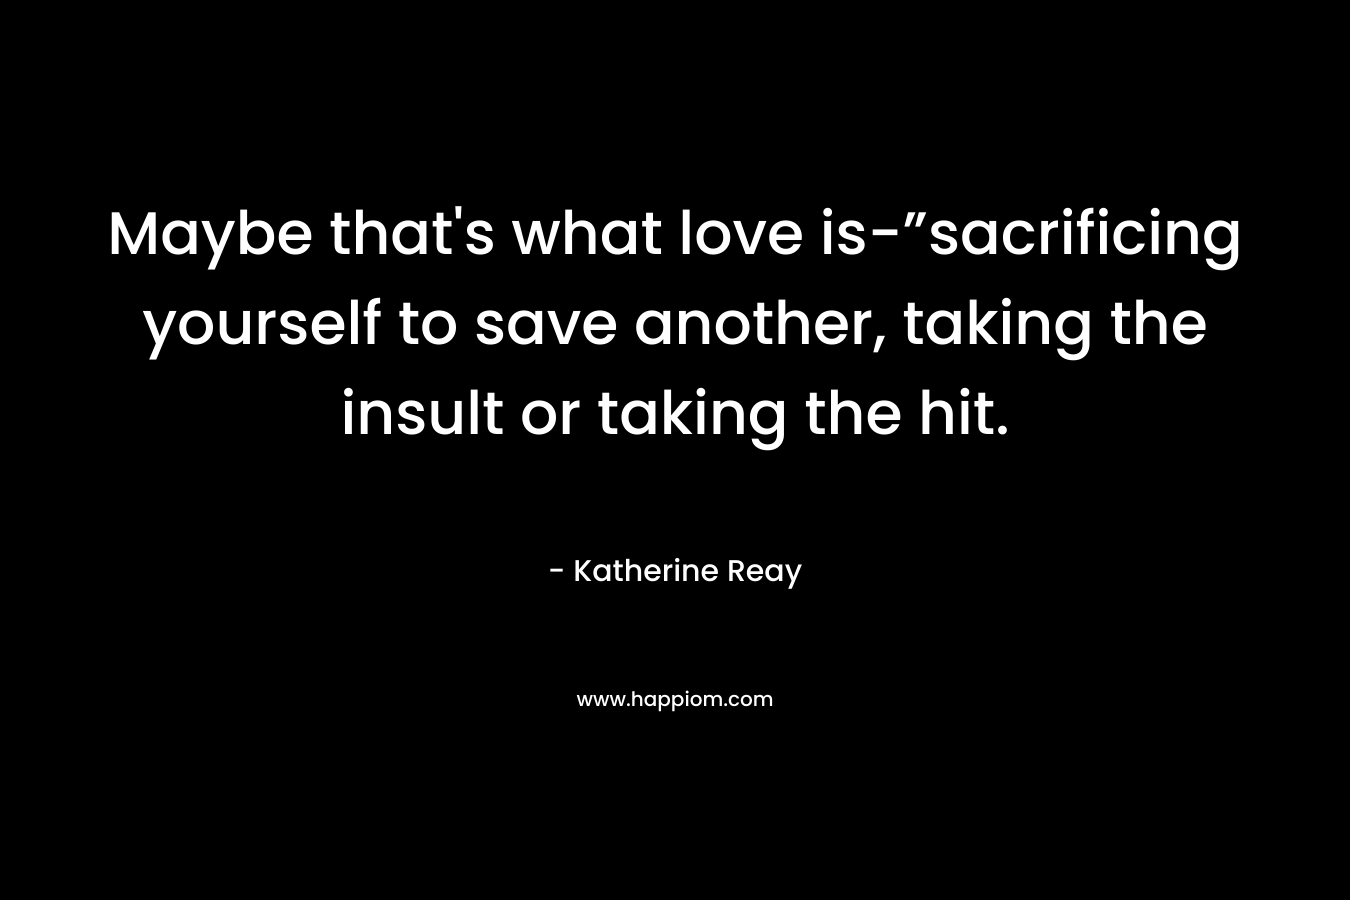 Maybe that's what love is-”sacrificing yourself to save another, taking the insult or taking the hit.